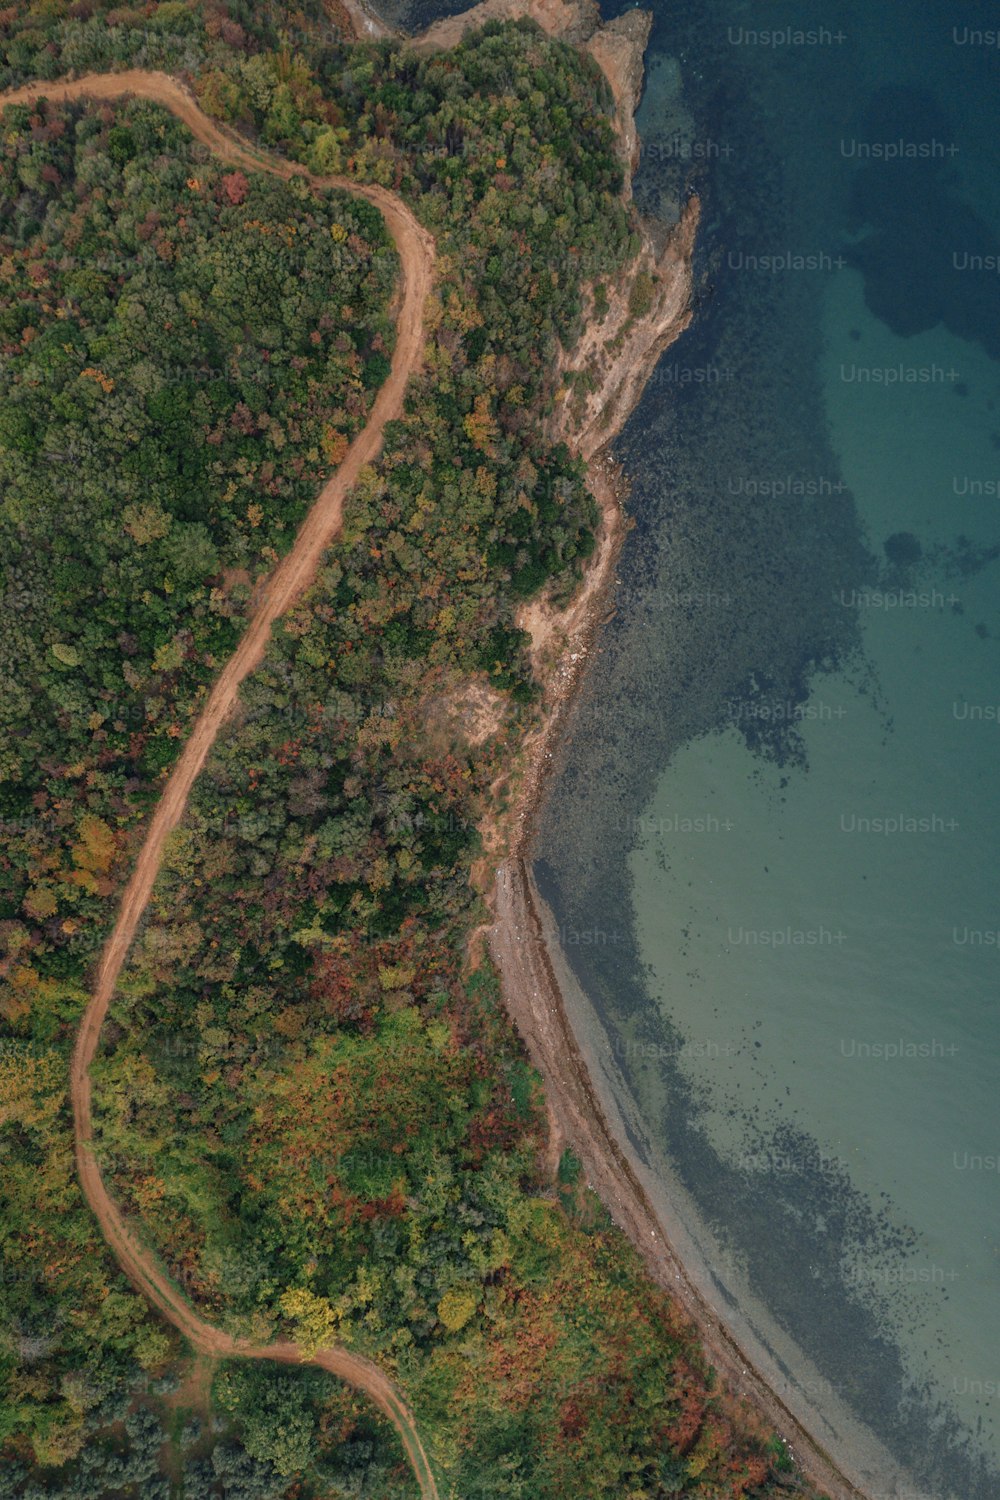 an aerial view of a winding dirt road next to a body of water